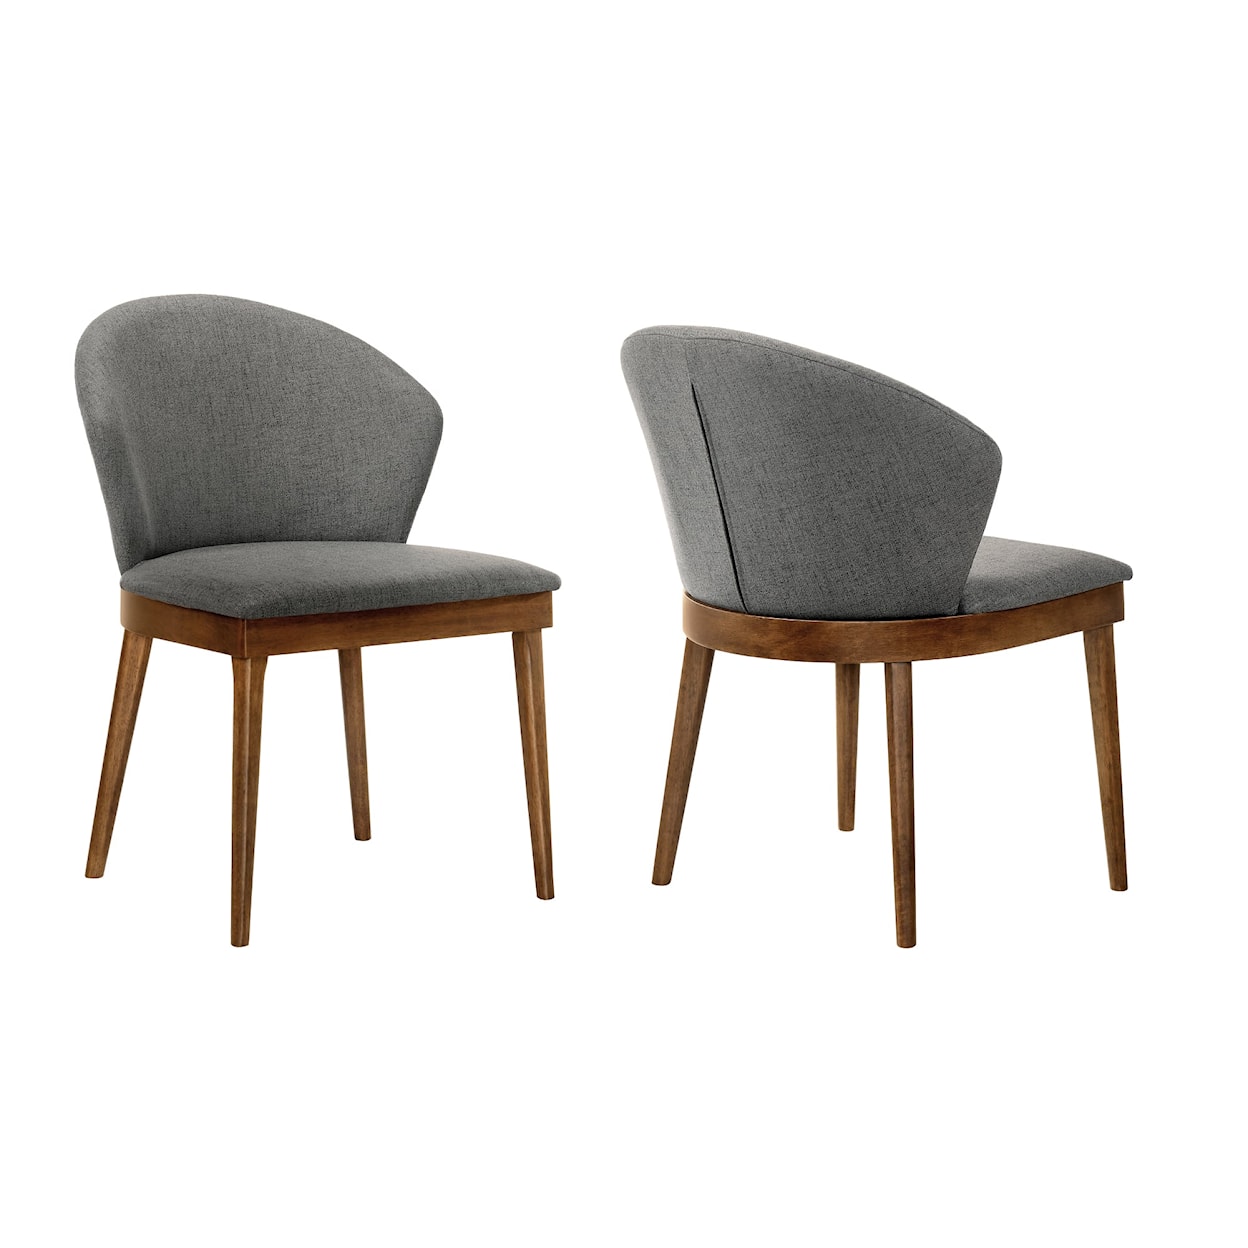 Armen Living Juno Set of 2 Side Chairs